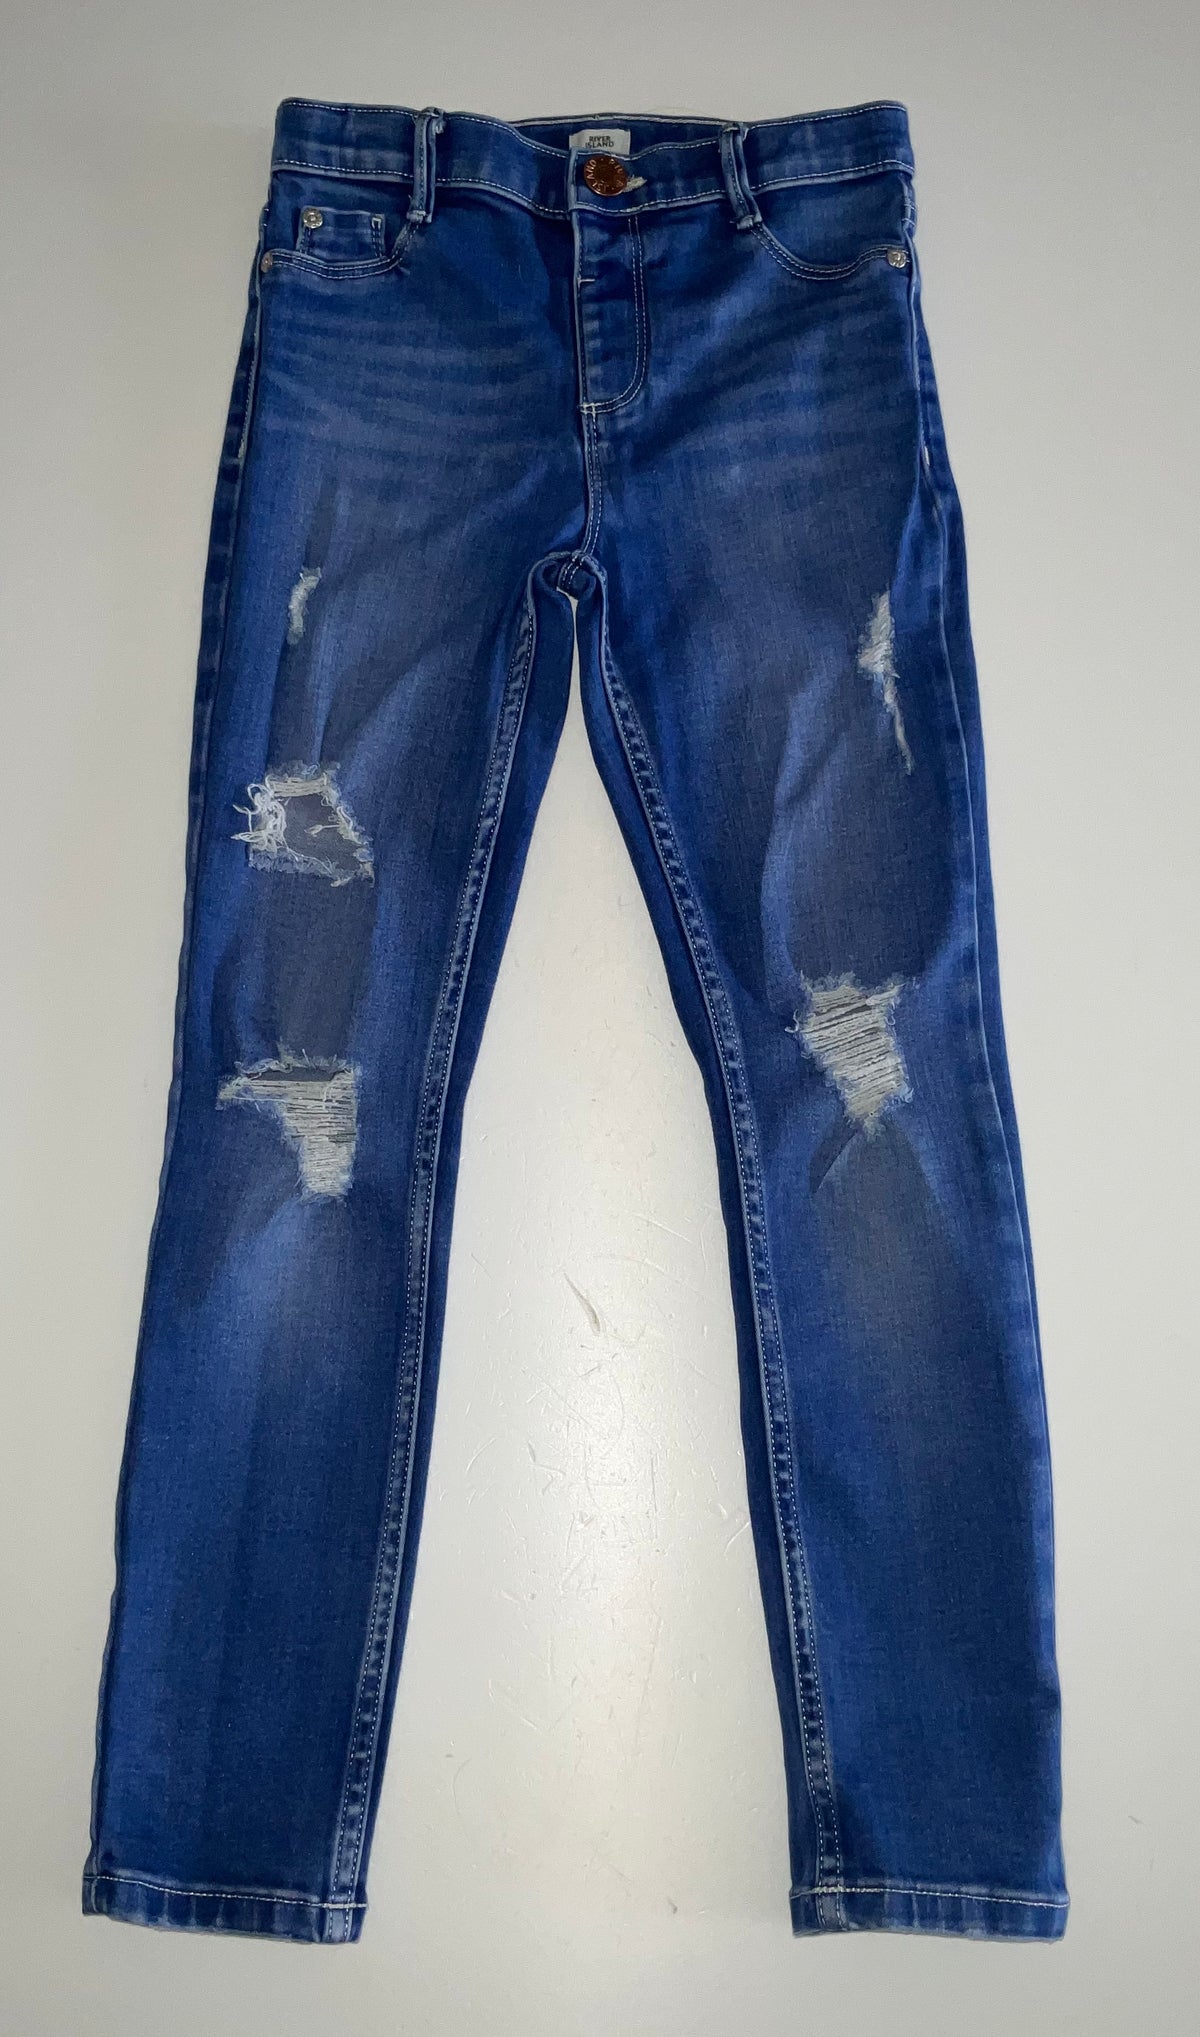 River Island Jeans, Girls 7-8/ 8 Years